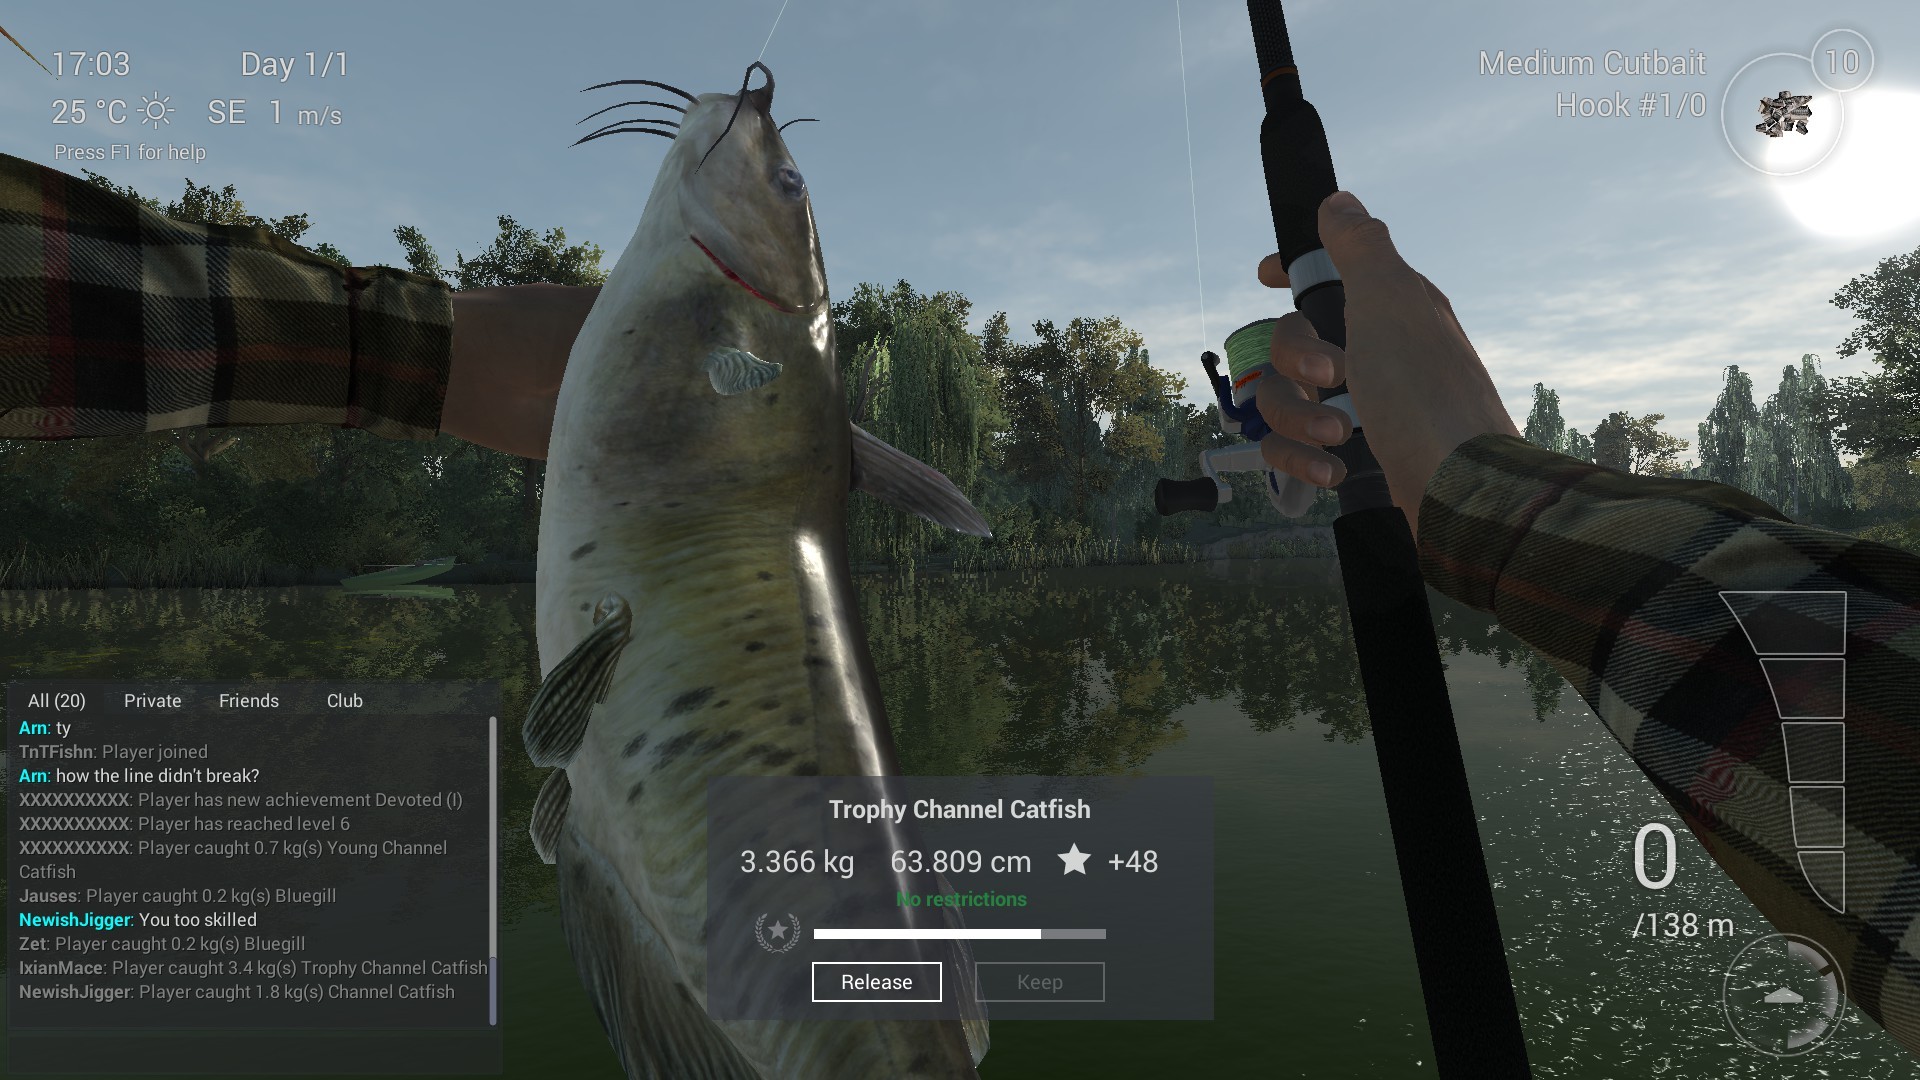 fishing planet xbox one cast further